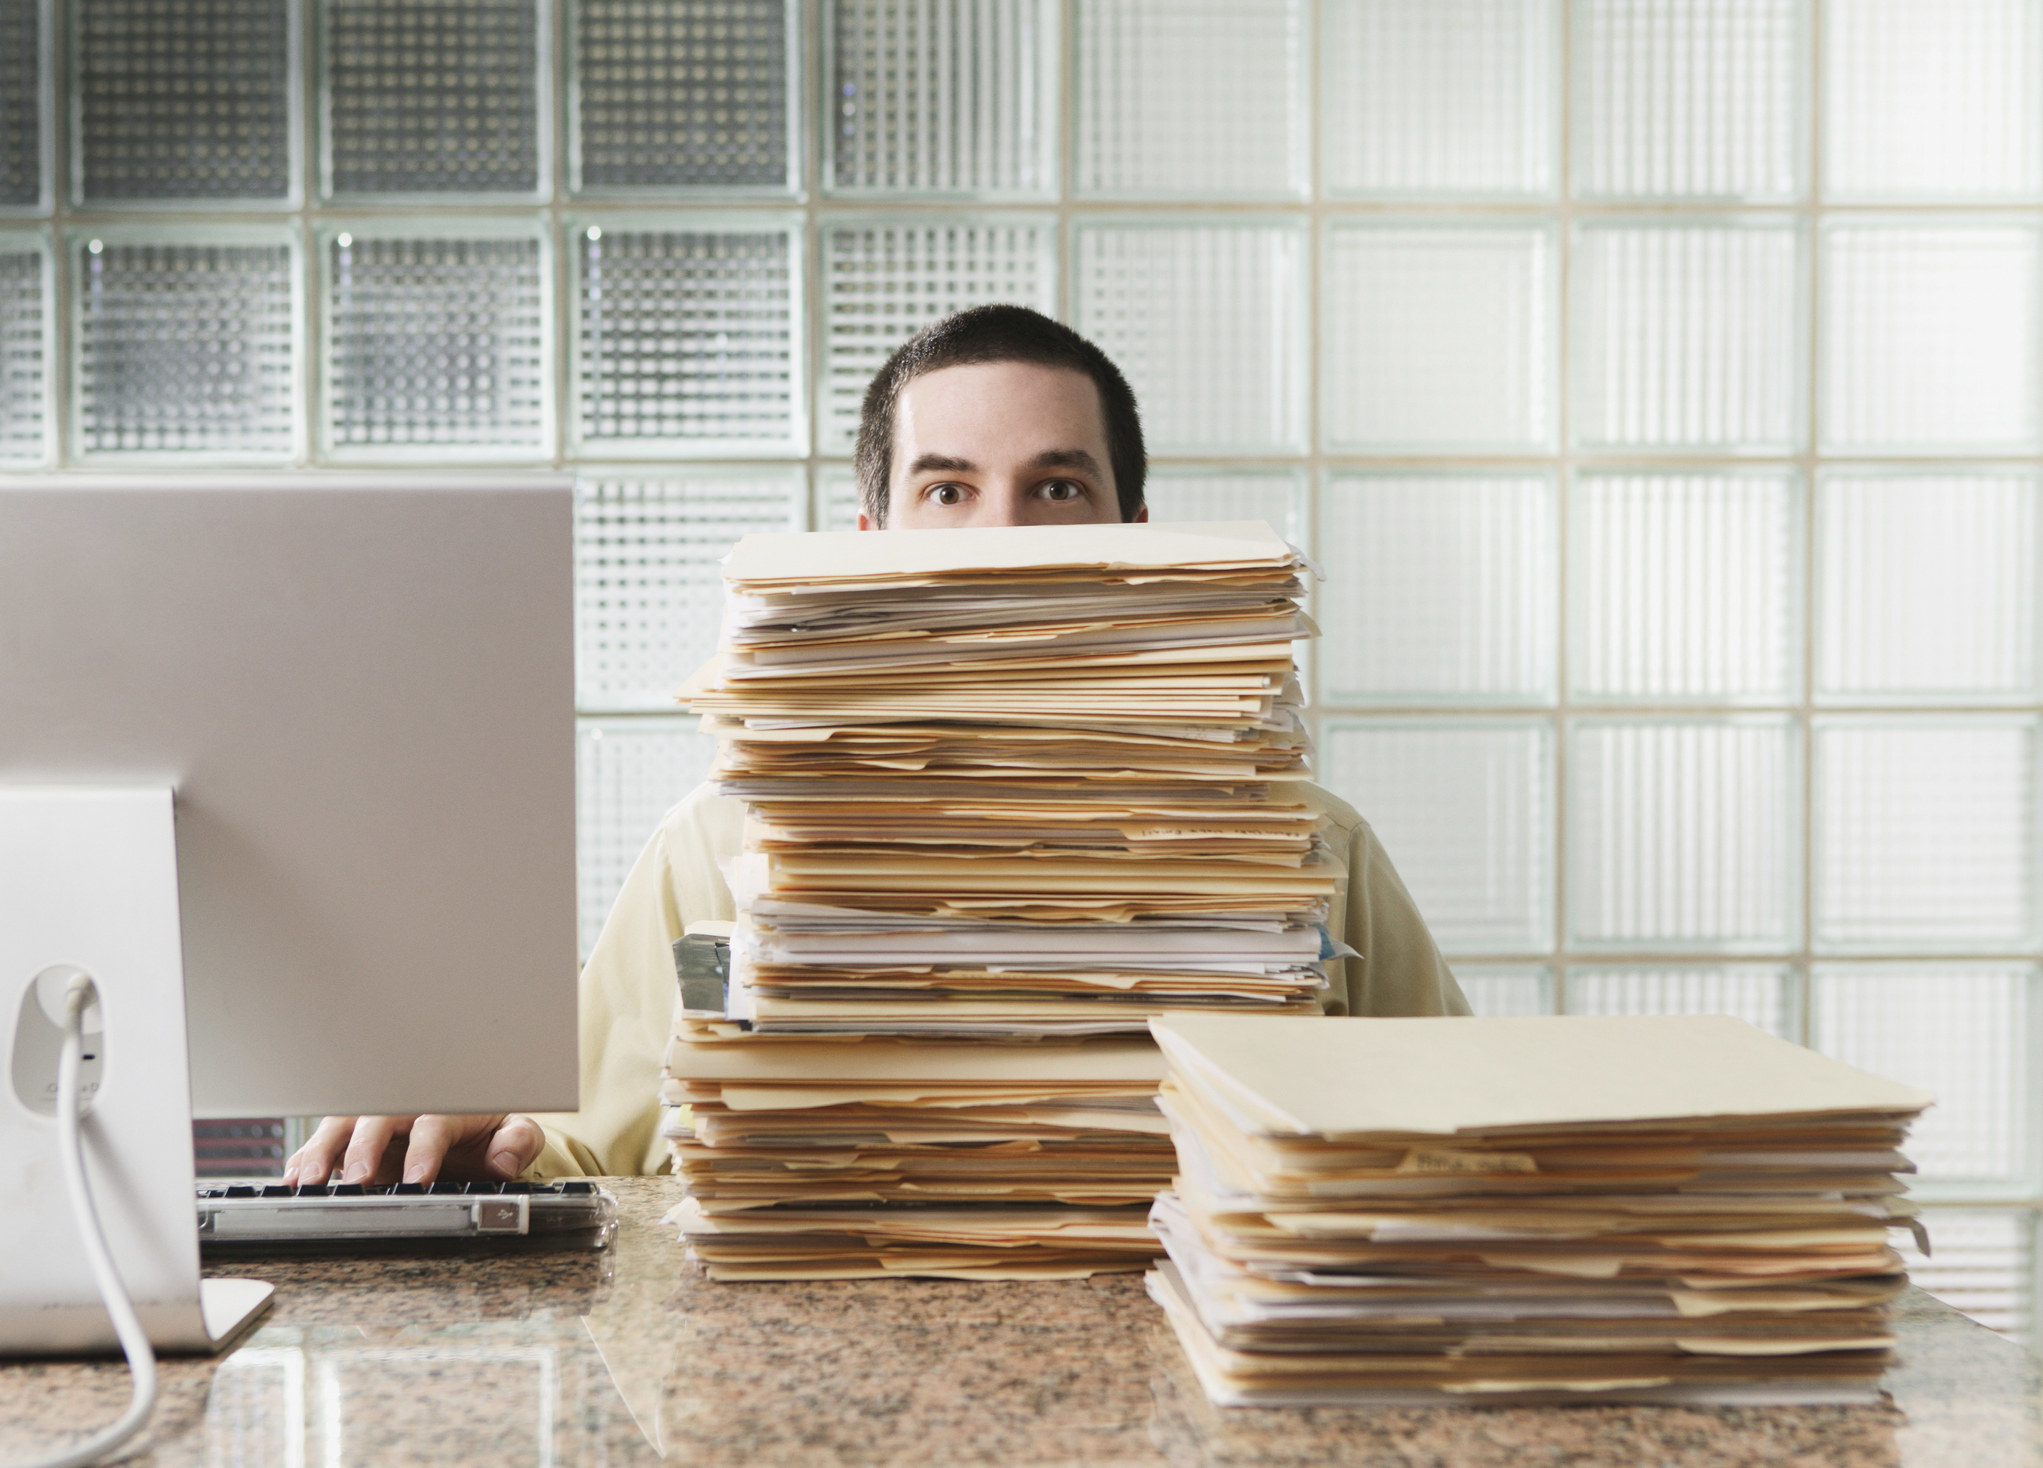 A man with a stack of files in front of him